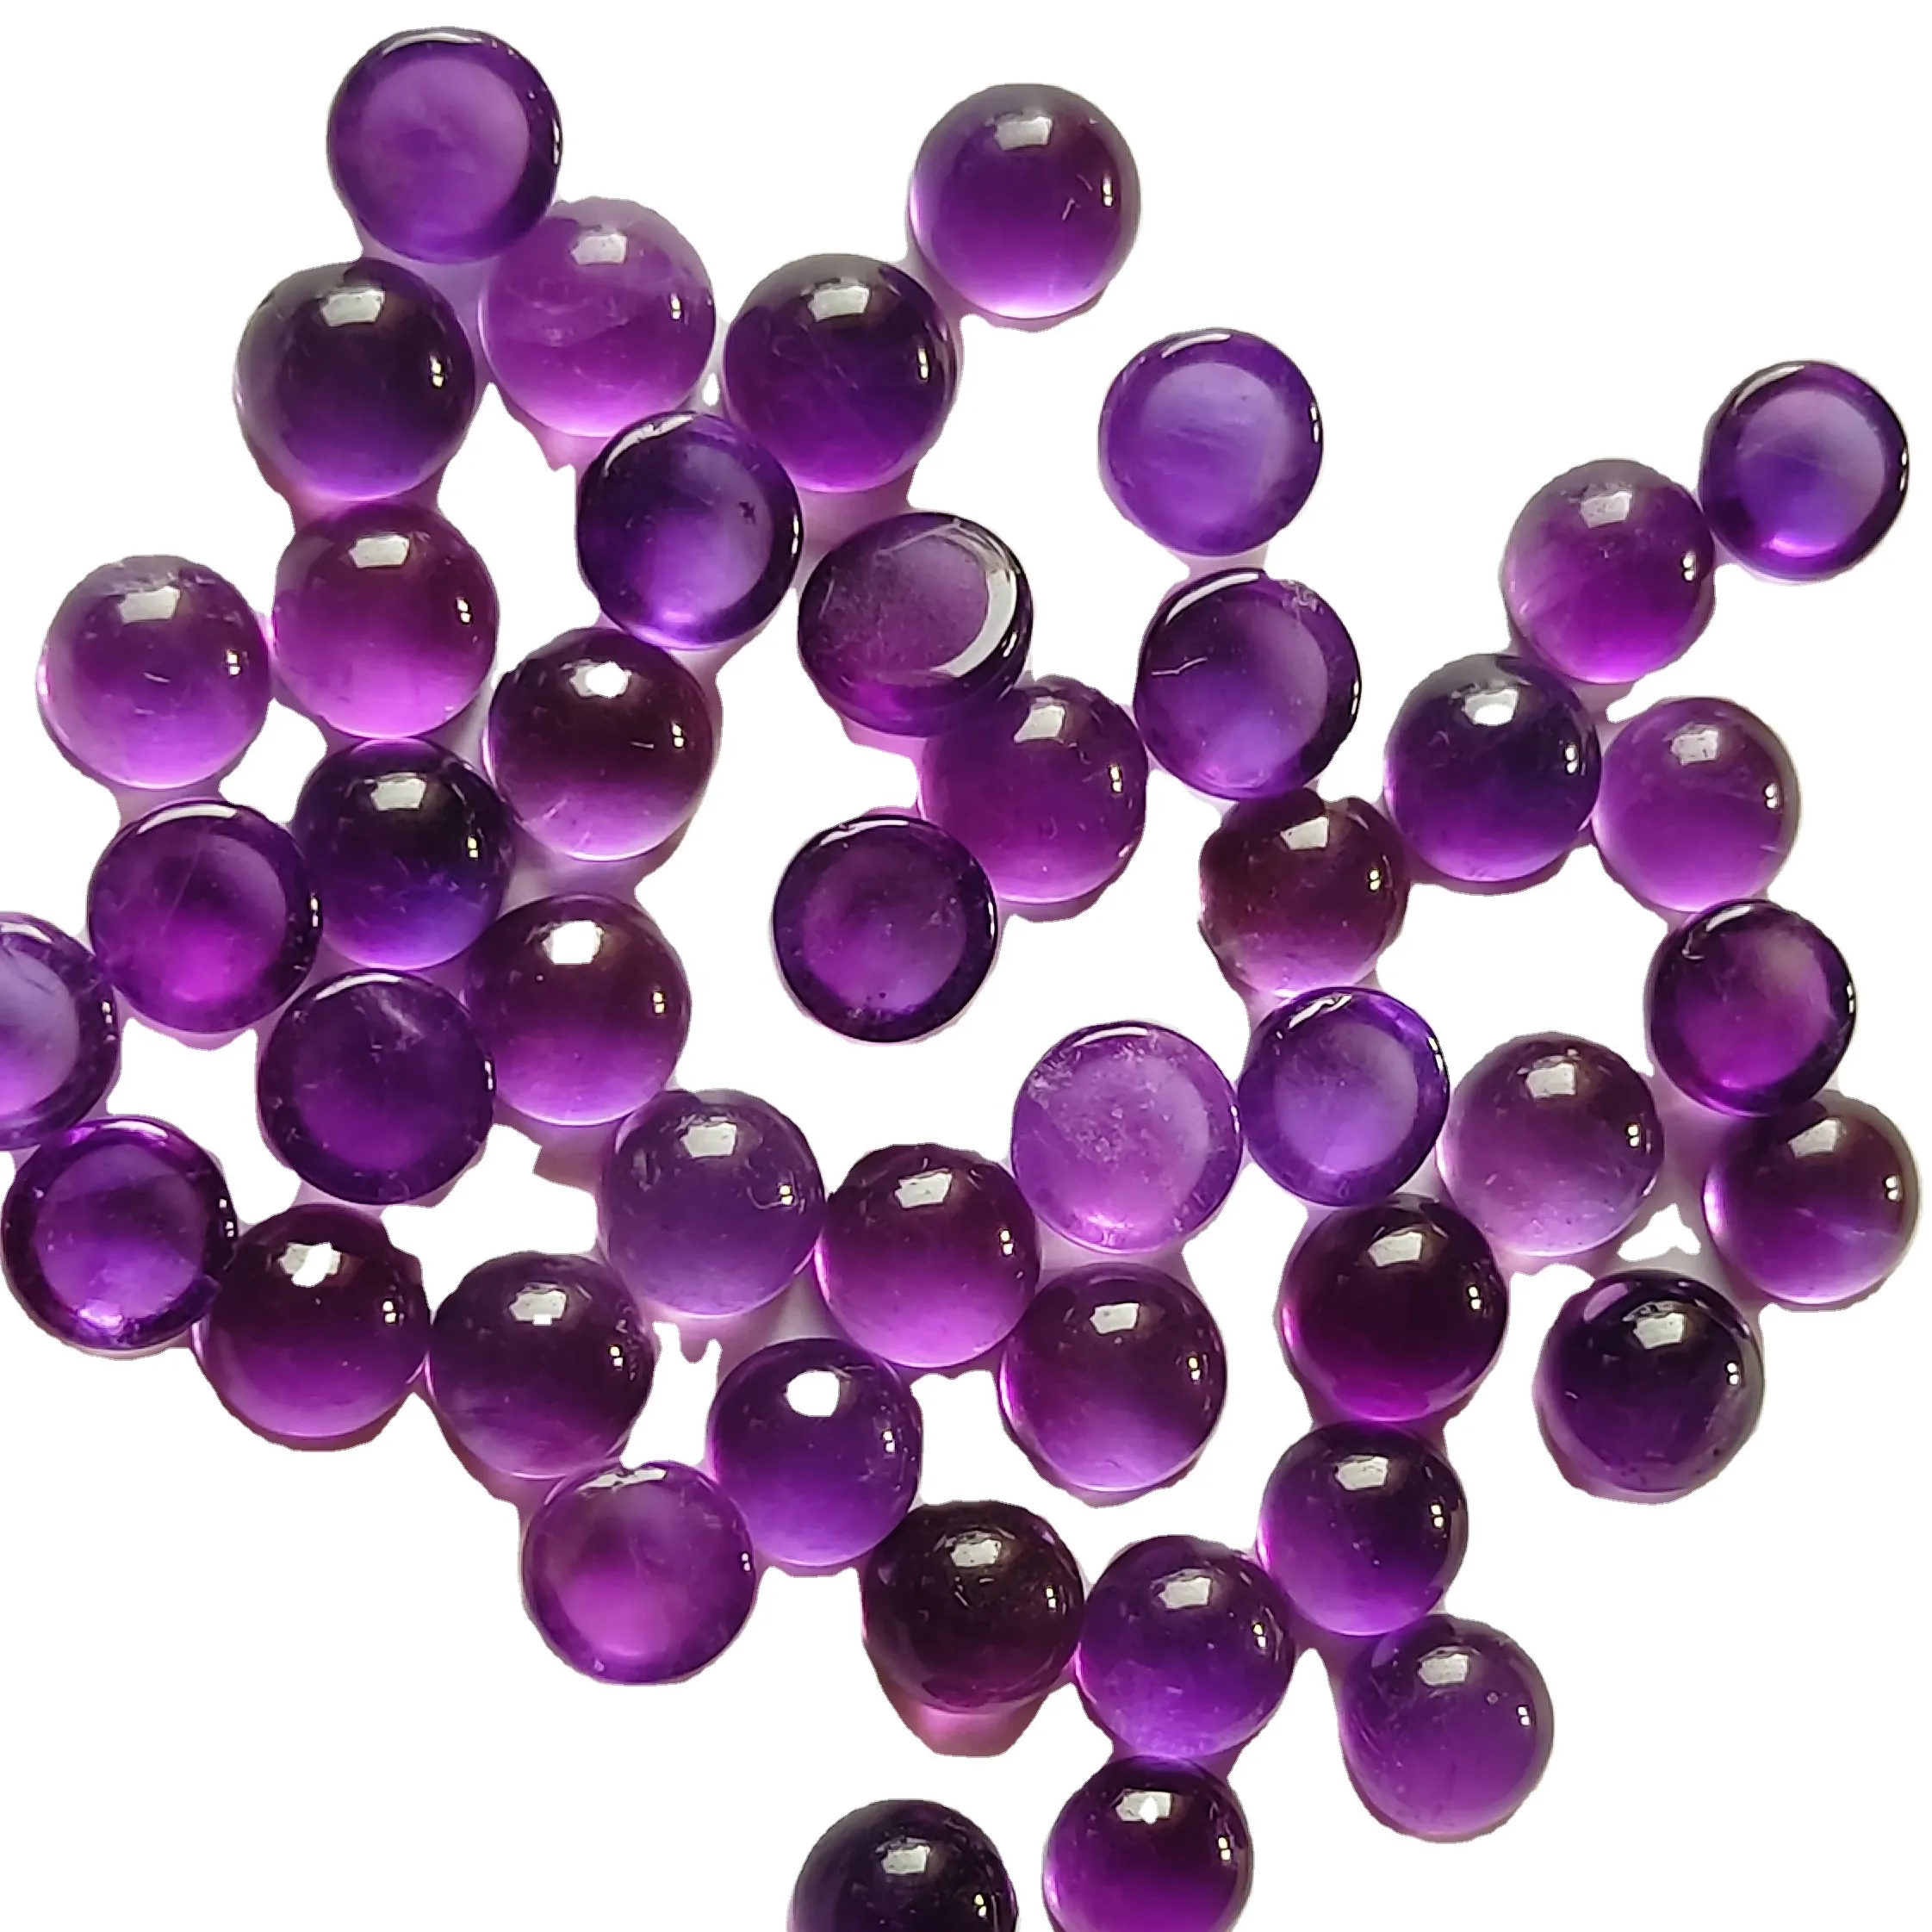 Natural Purple Color Amethyst 2mm Round Shape Smooth Flat back Loose Gemstones Cabochons Lot